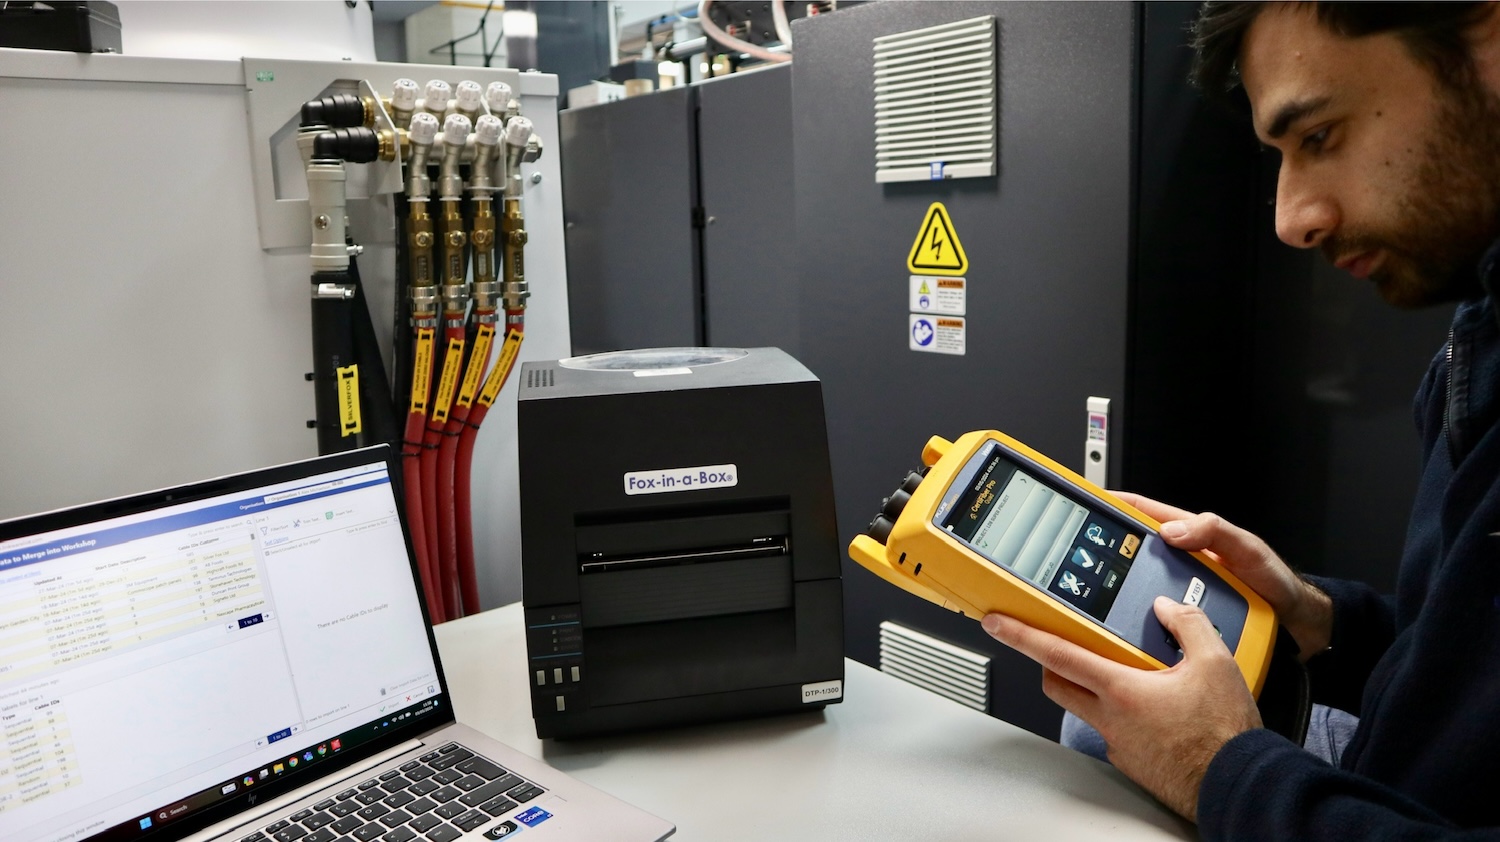 Man works with a Versiv tool in front of a desktop holding a laptop and a thermal printer